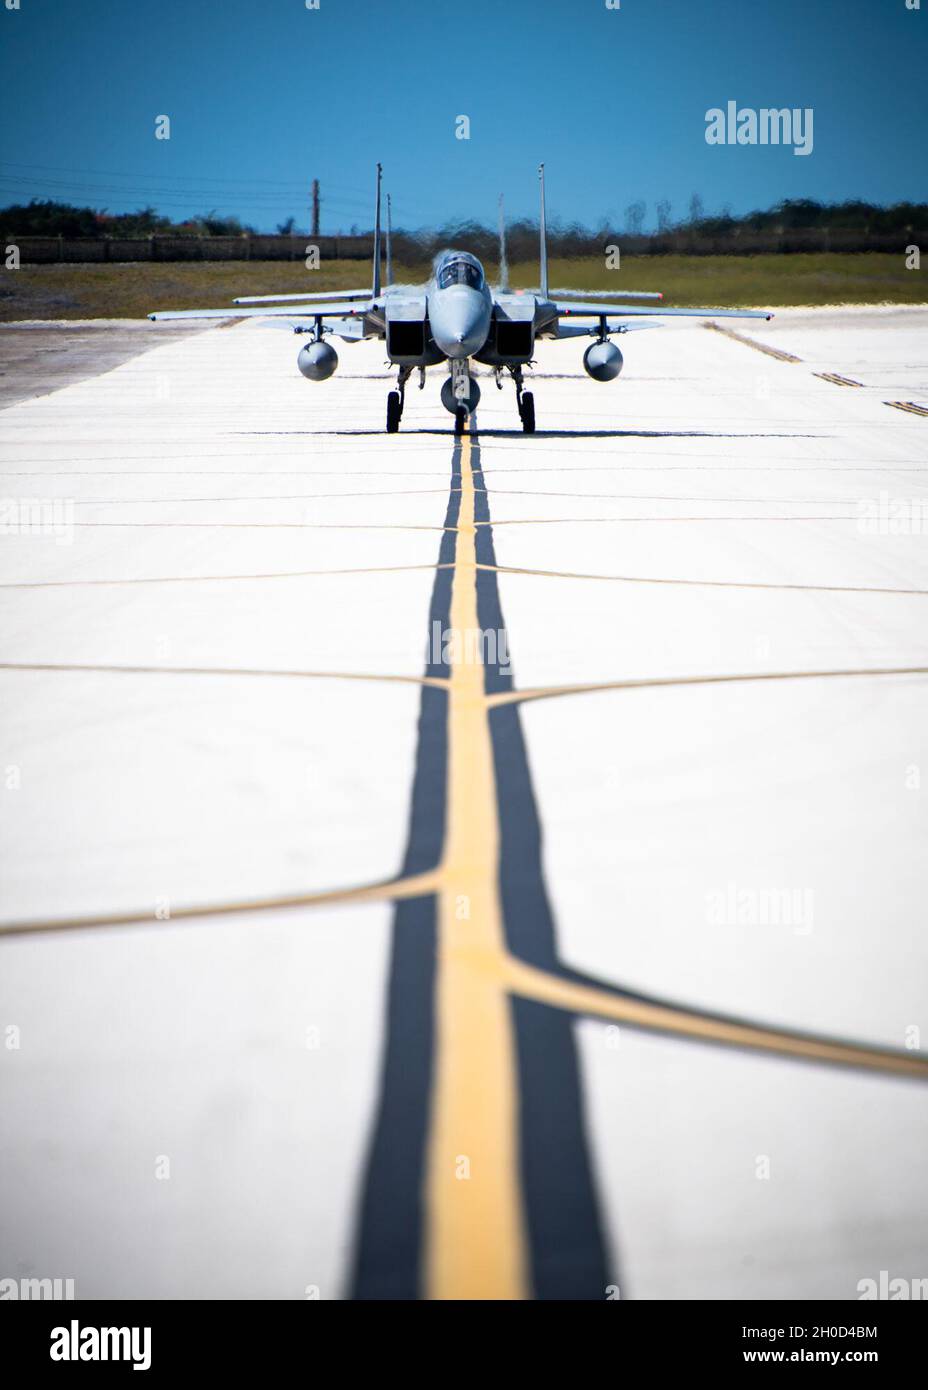 Two Japan Air Self-Defense Force, or Koku-Jieitai, F-15J Eagles taxi after landing at Andersen Air Force Base, Guam, during exercise Cope North 21, Jan. 28, 2021.  Cope North is an annual exercise that serves as a keystone event to promote stability and security throughout the Indo-Pacific. Stock Photo